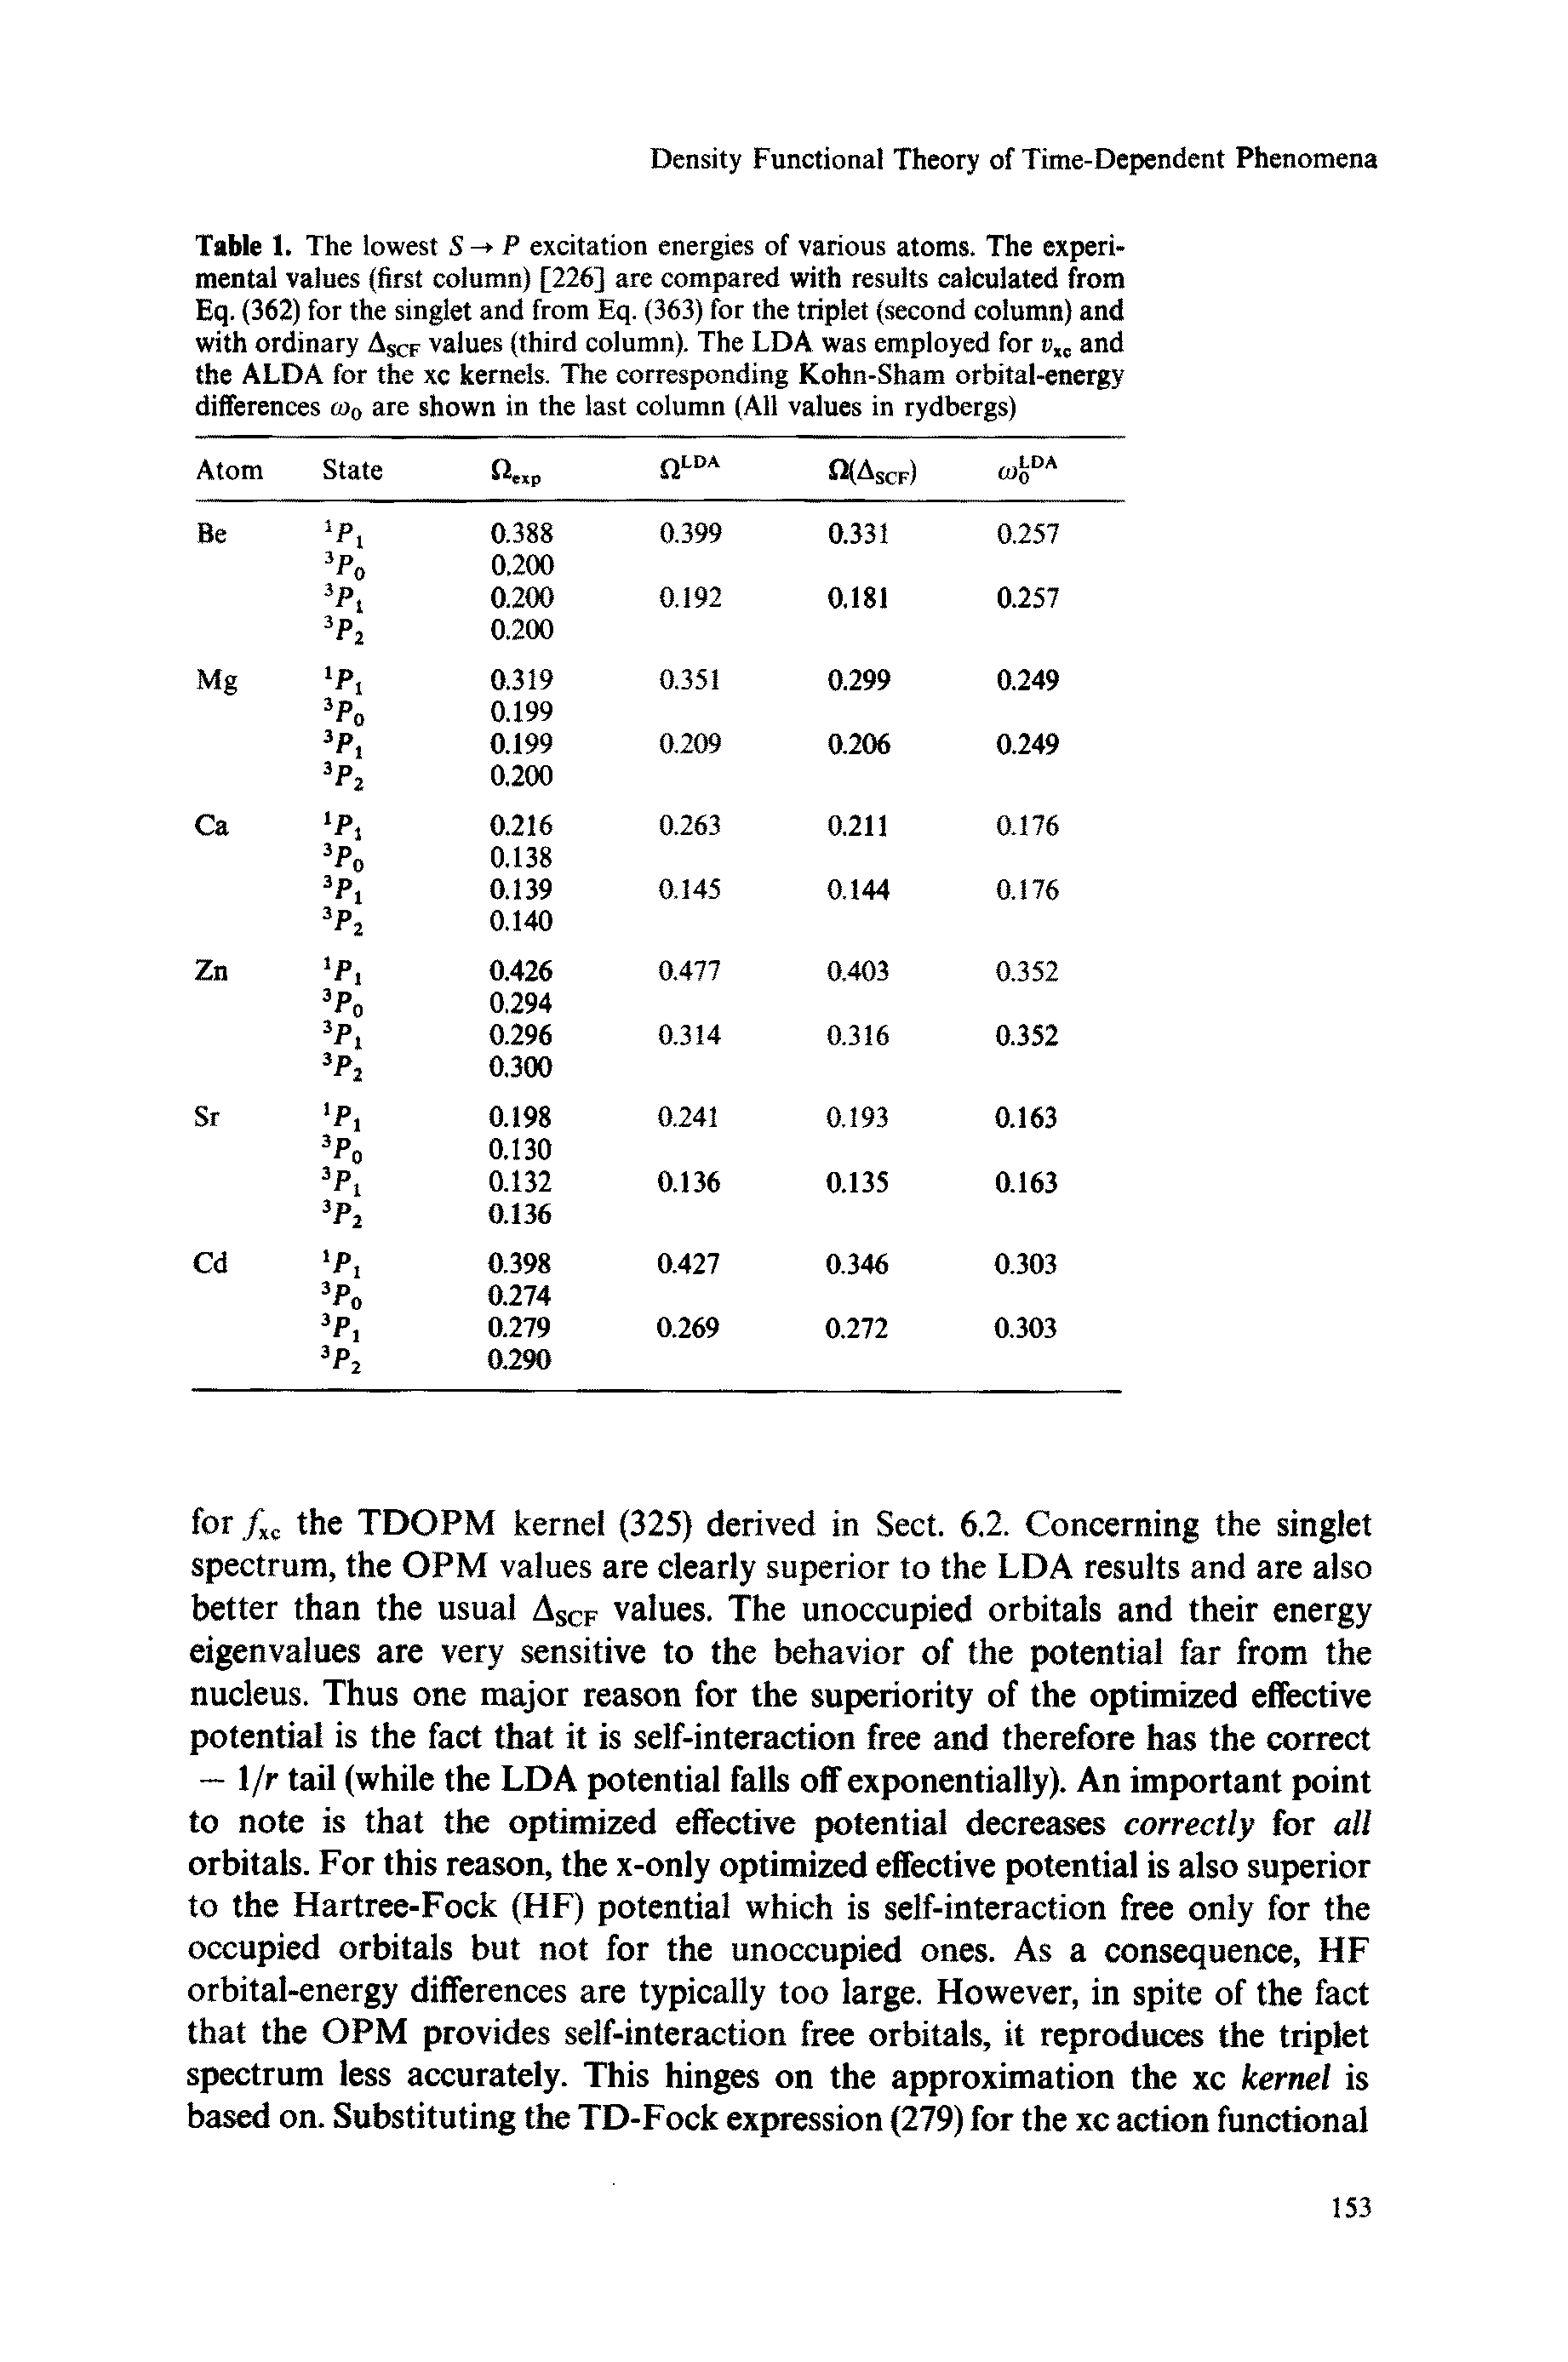 Table 1. The lowest S - P excitation energies of various atoms. The experimental values (first column) [226] are compared with results calculated from Eq. (362) for the singlet and from Eq. (363) for the triplet (second column) and with ordinary Ascf values (third column). The LDA was employed for v c and the ALDA for the xc kernels. The corresponding Kohn-Sham orbital-energy differences Oo are shown in the last column (All values in rydbergs)...